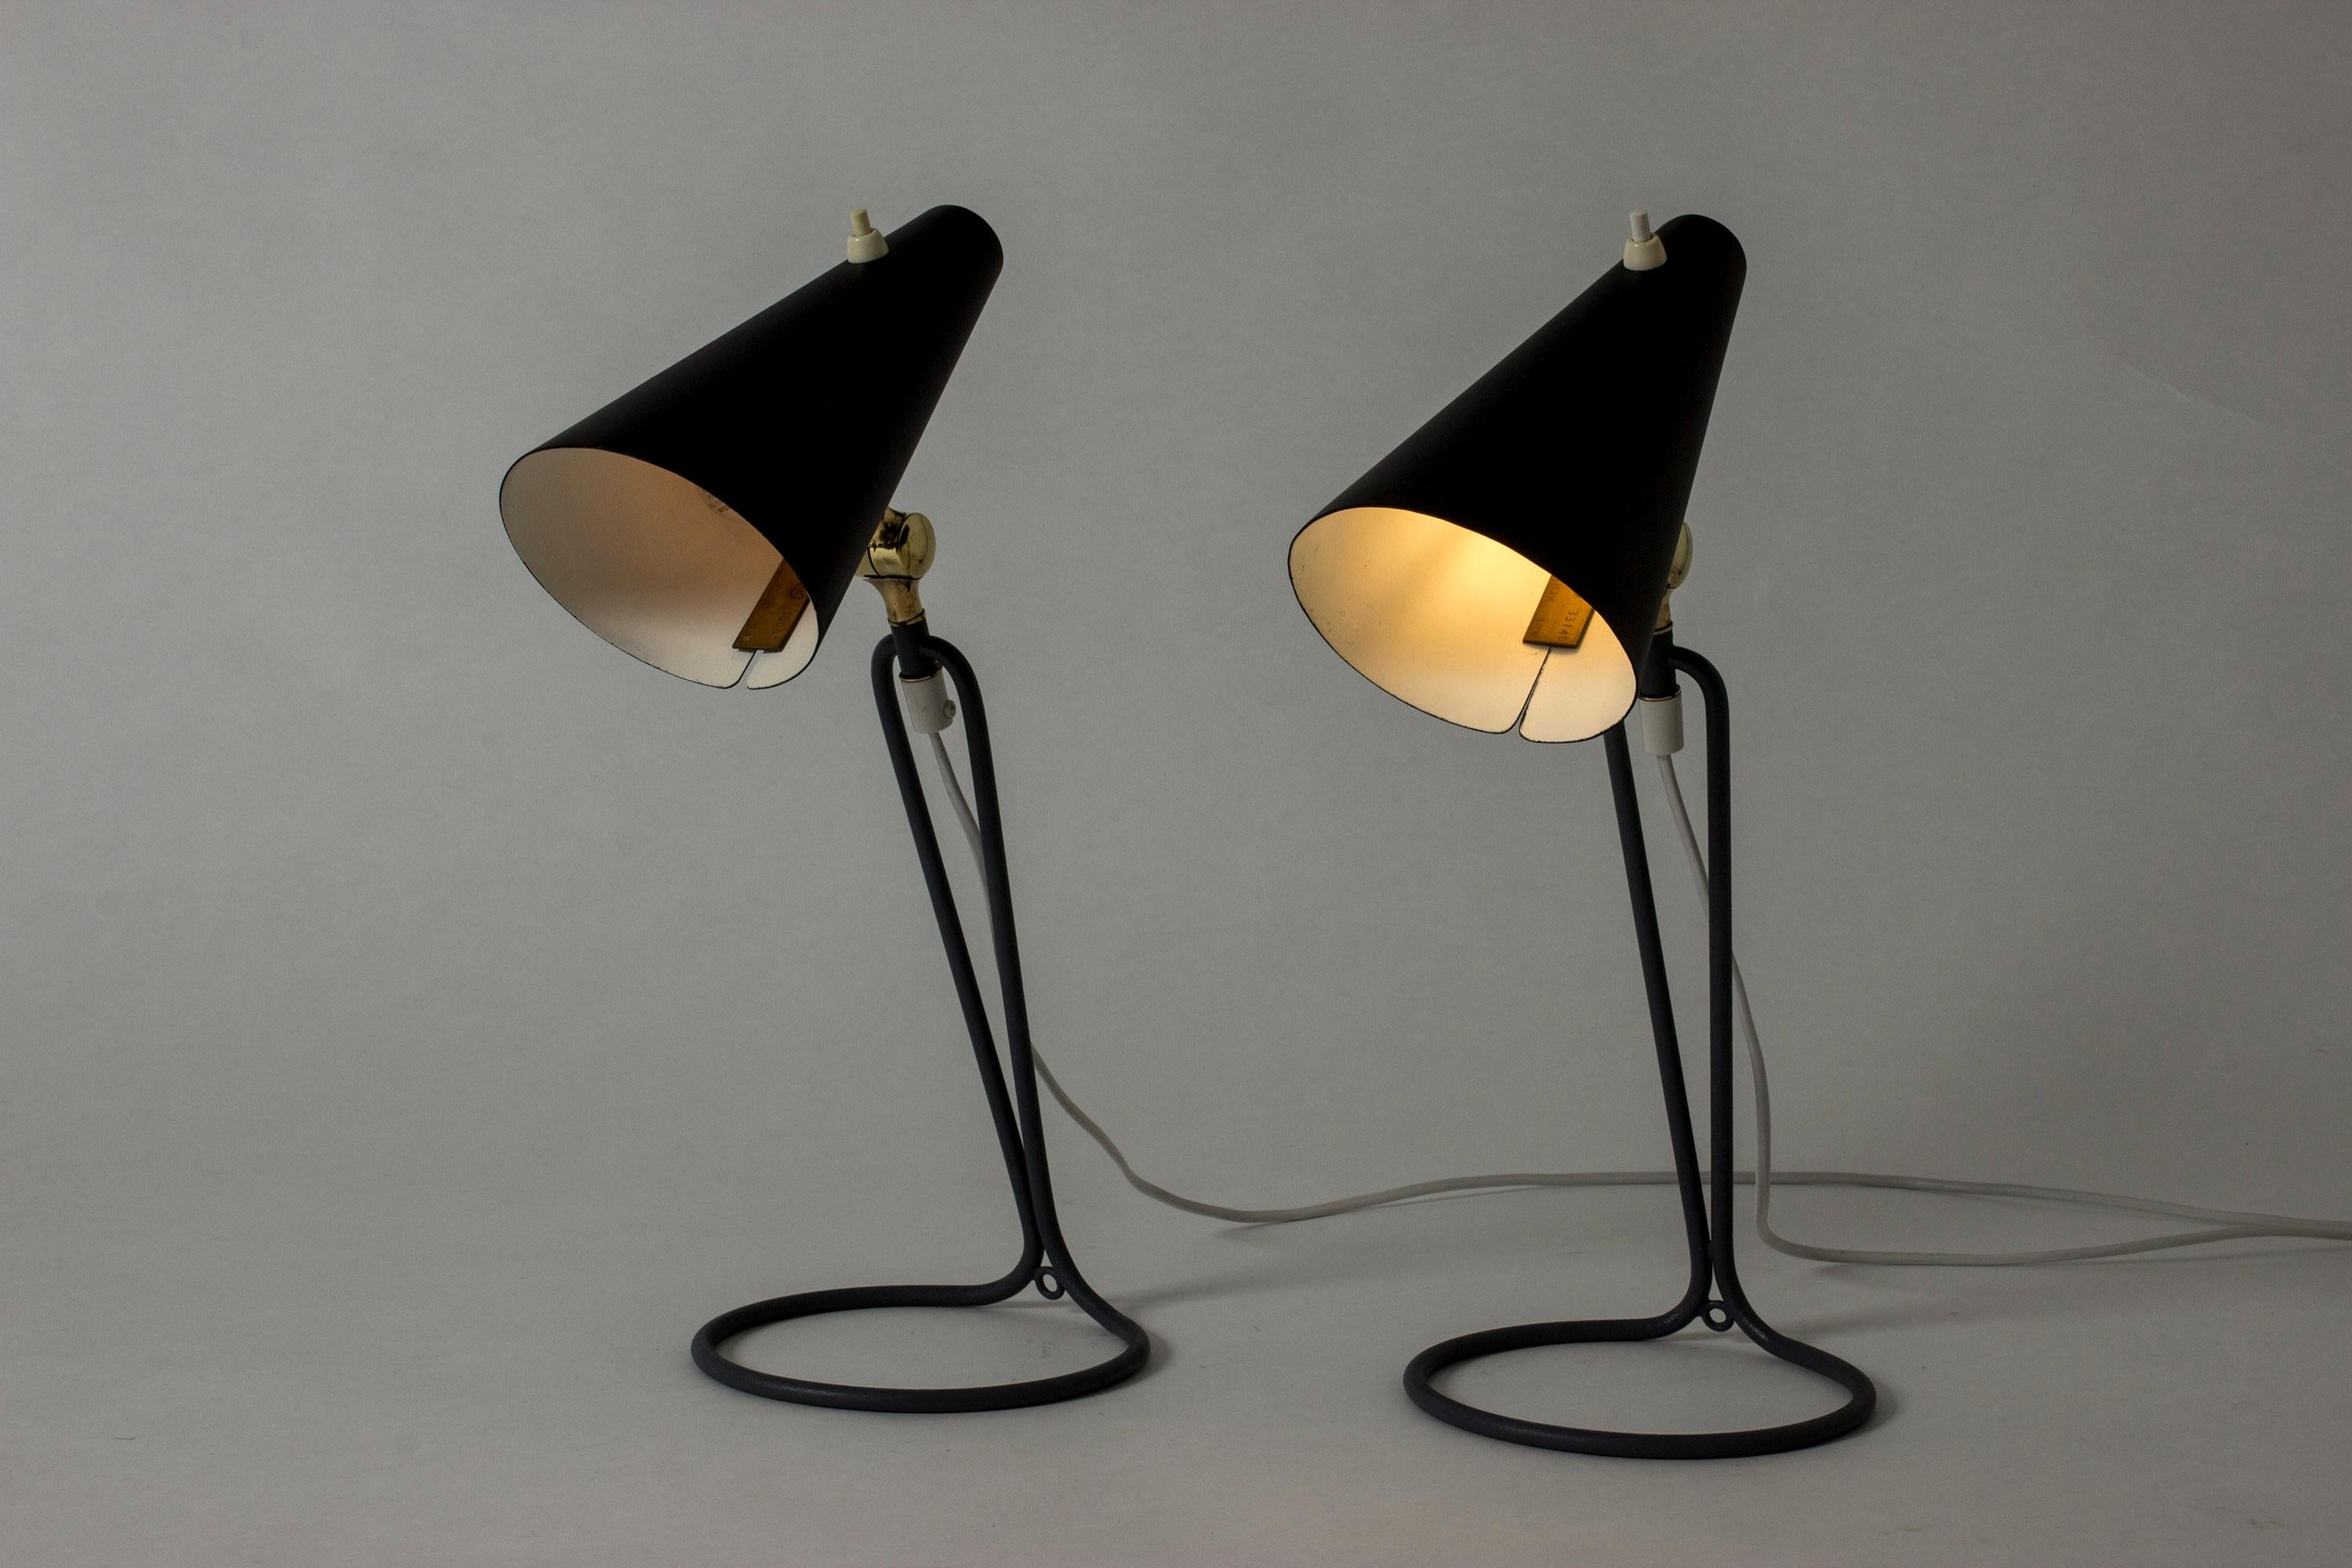 Pair of amazing table lamps by Bertil Brisborg, with black lacquered shades. Cool grey base in a slender graphic design. Contrasting brass joints.